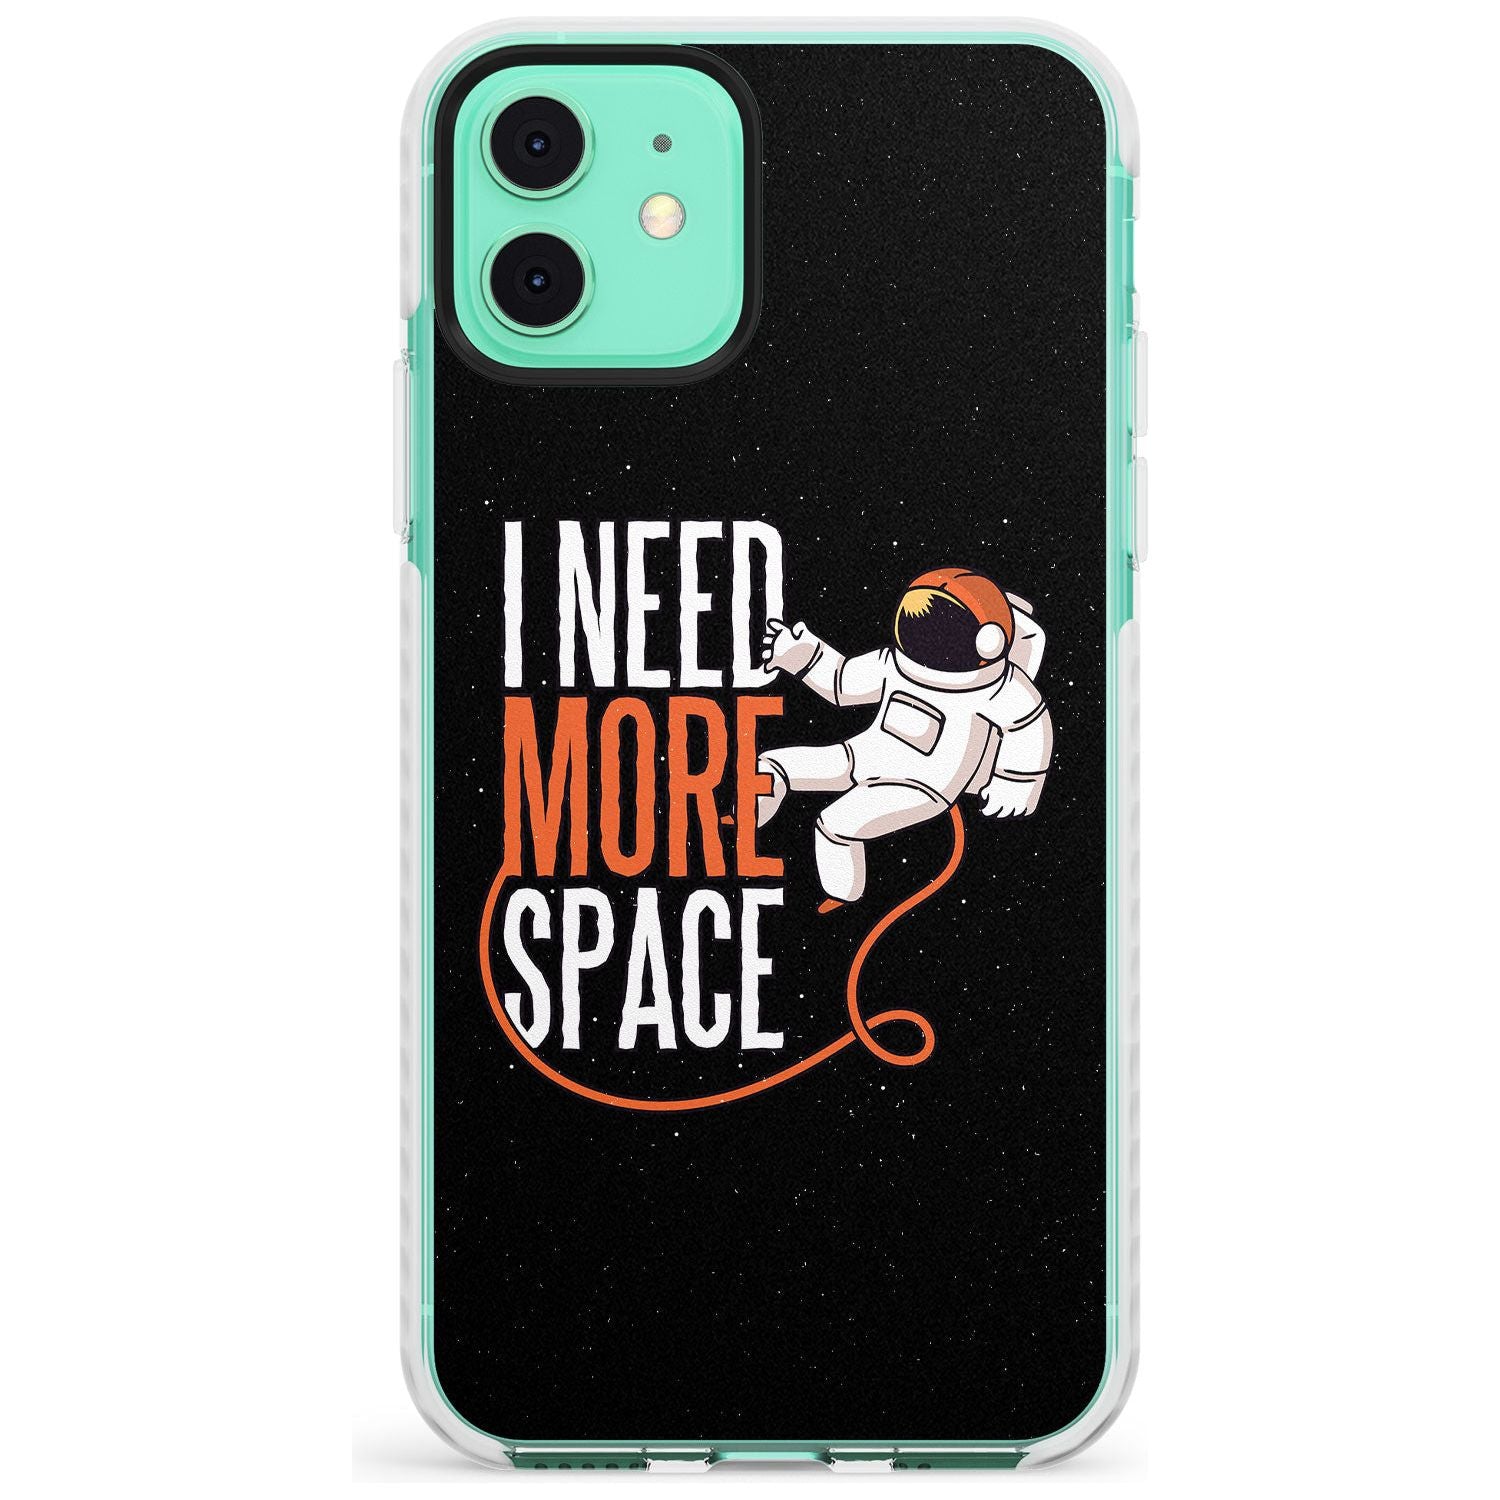 I Need More Space Slim TPU Phone Case for iPhone 11